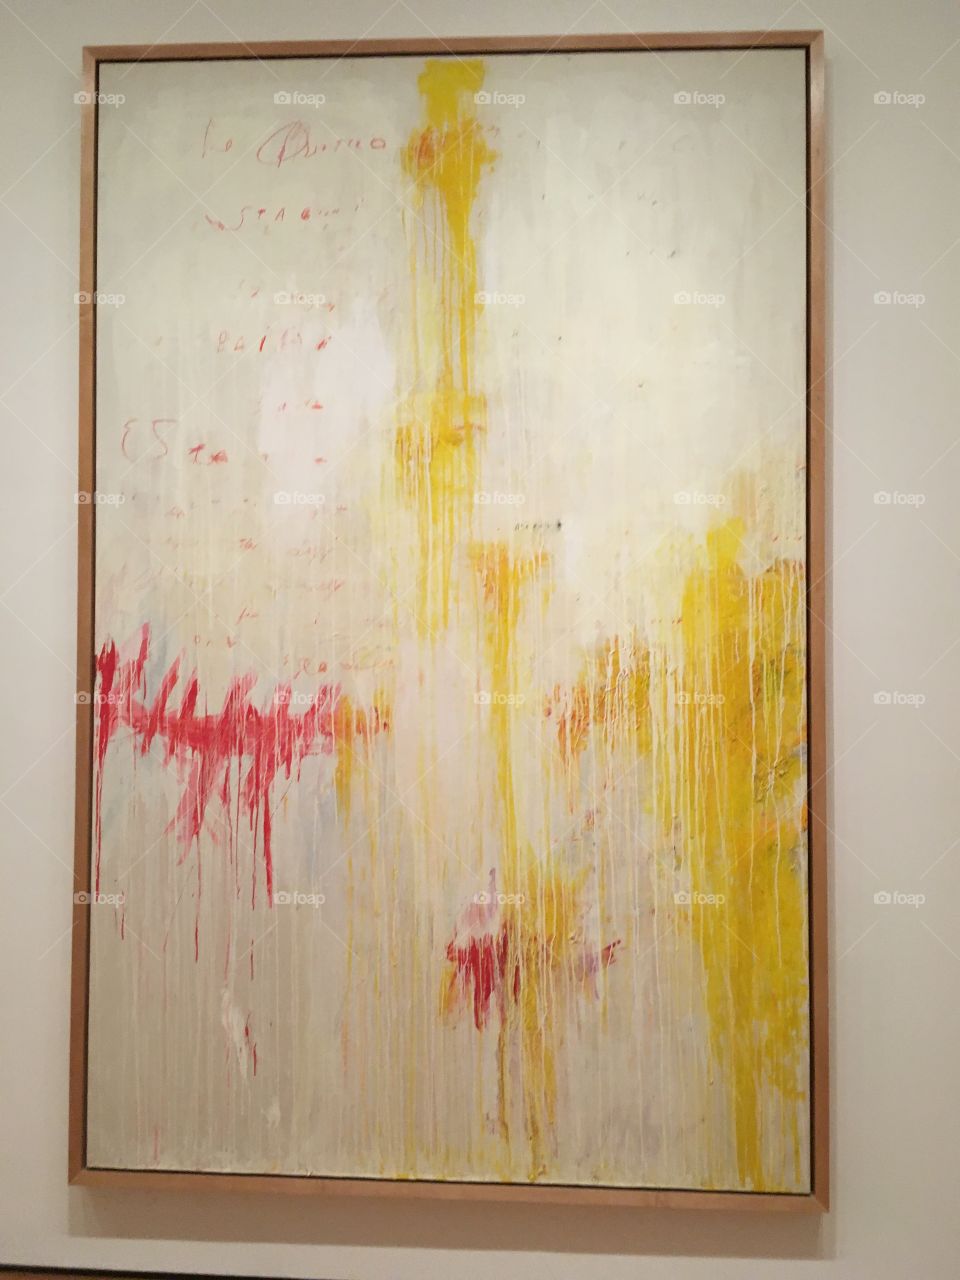 Cy Twombly - The Four Seasons - MoMA - Manhattan - New York City 